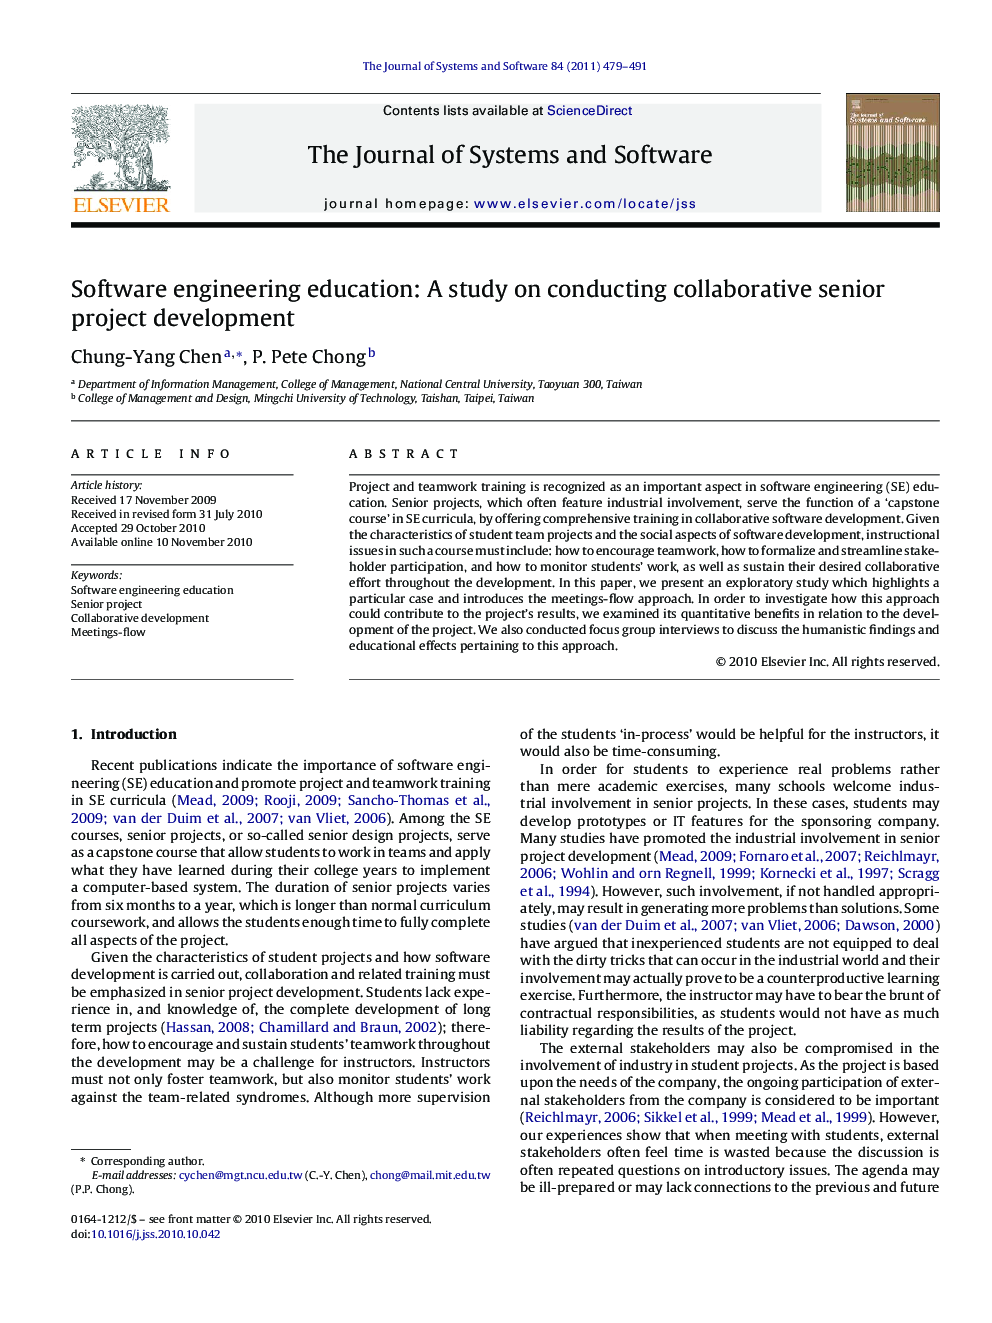 Software engineering education: A study on conducting collaborative senior project development